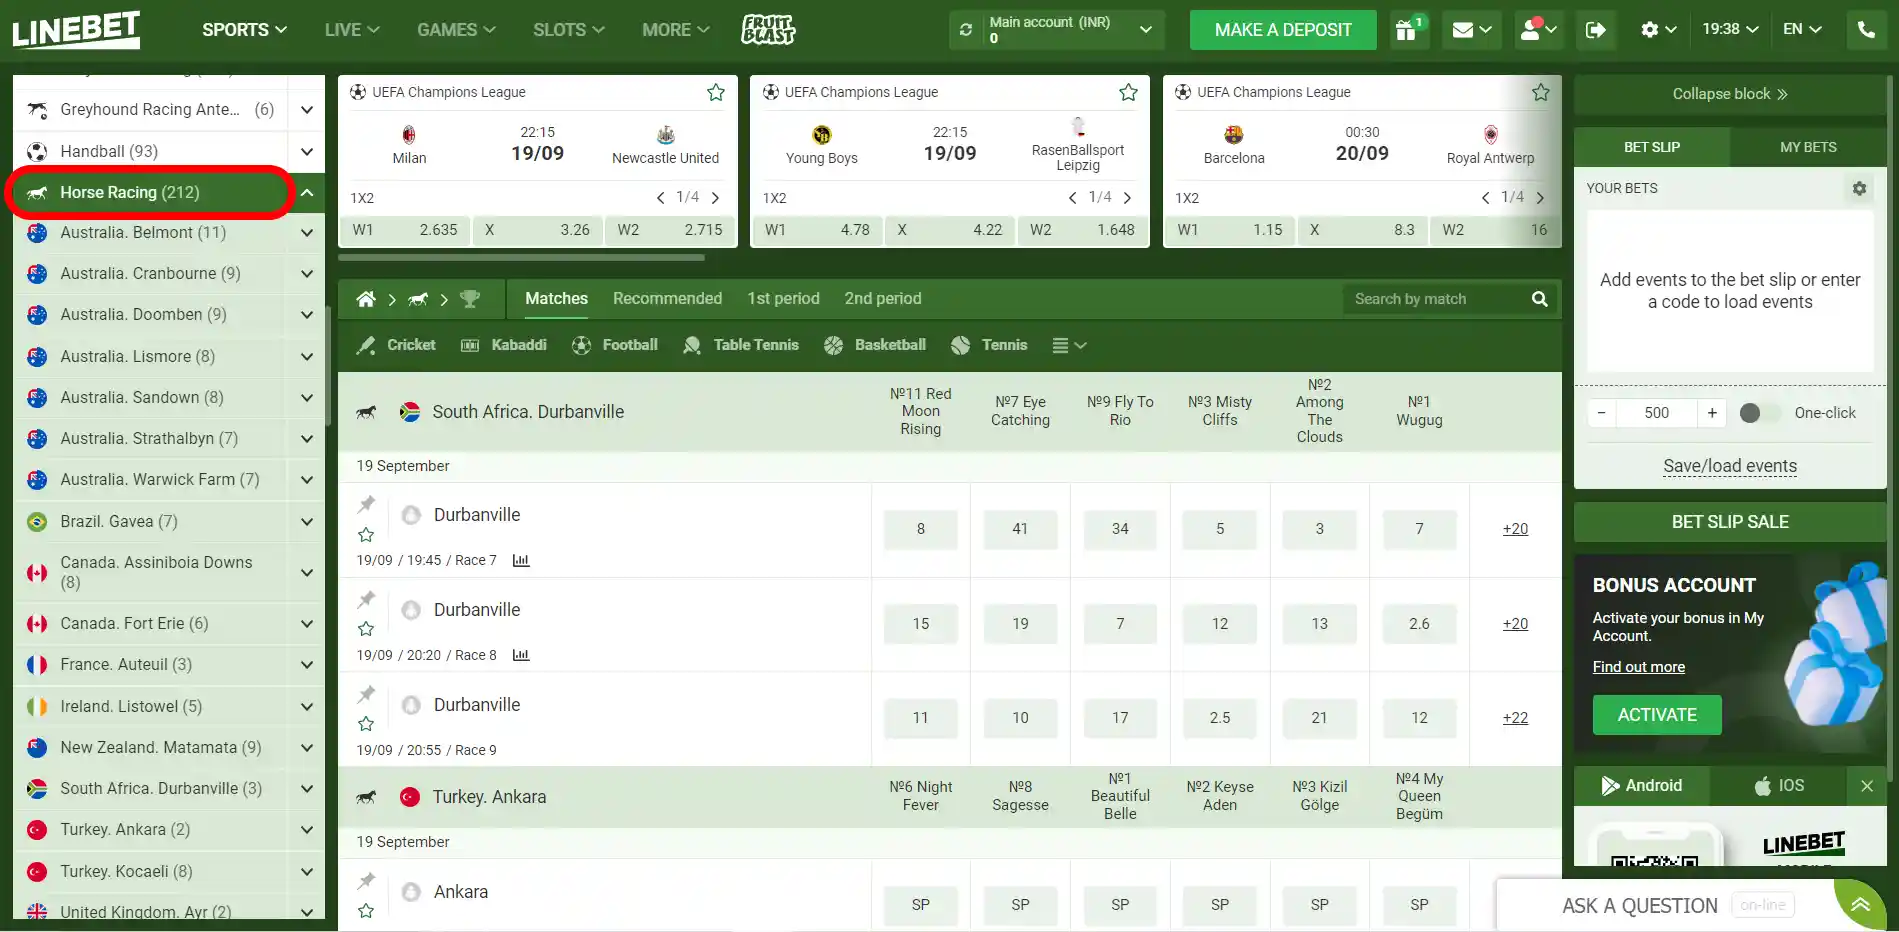 Open the horse racing section and explore the odds and betting markets.